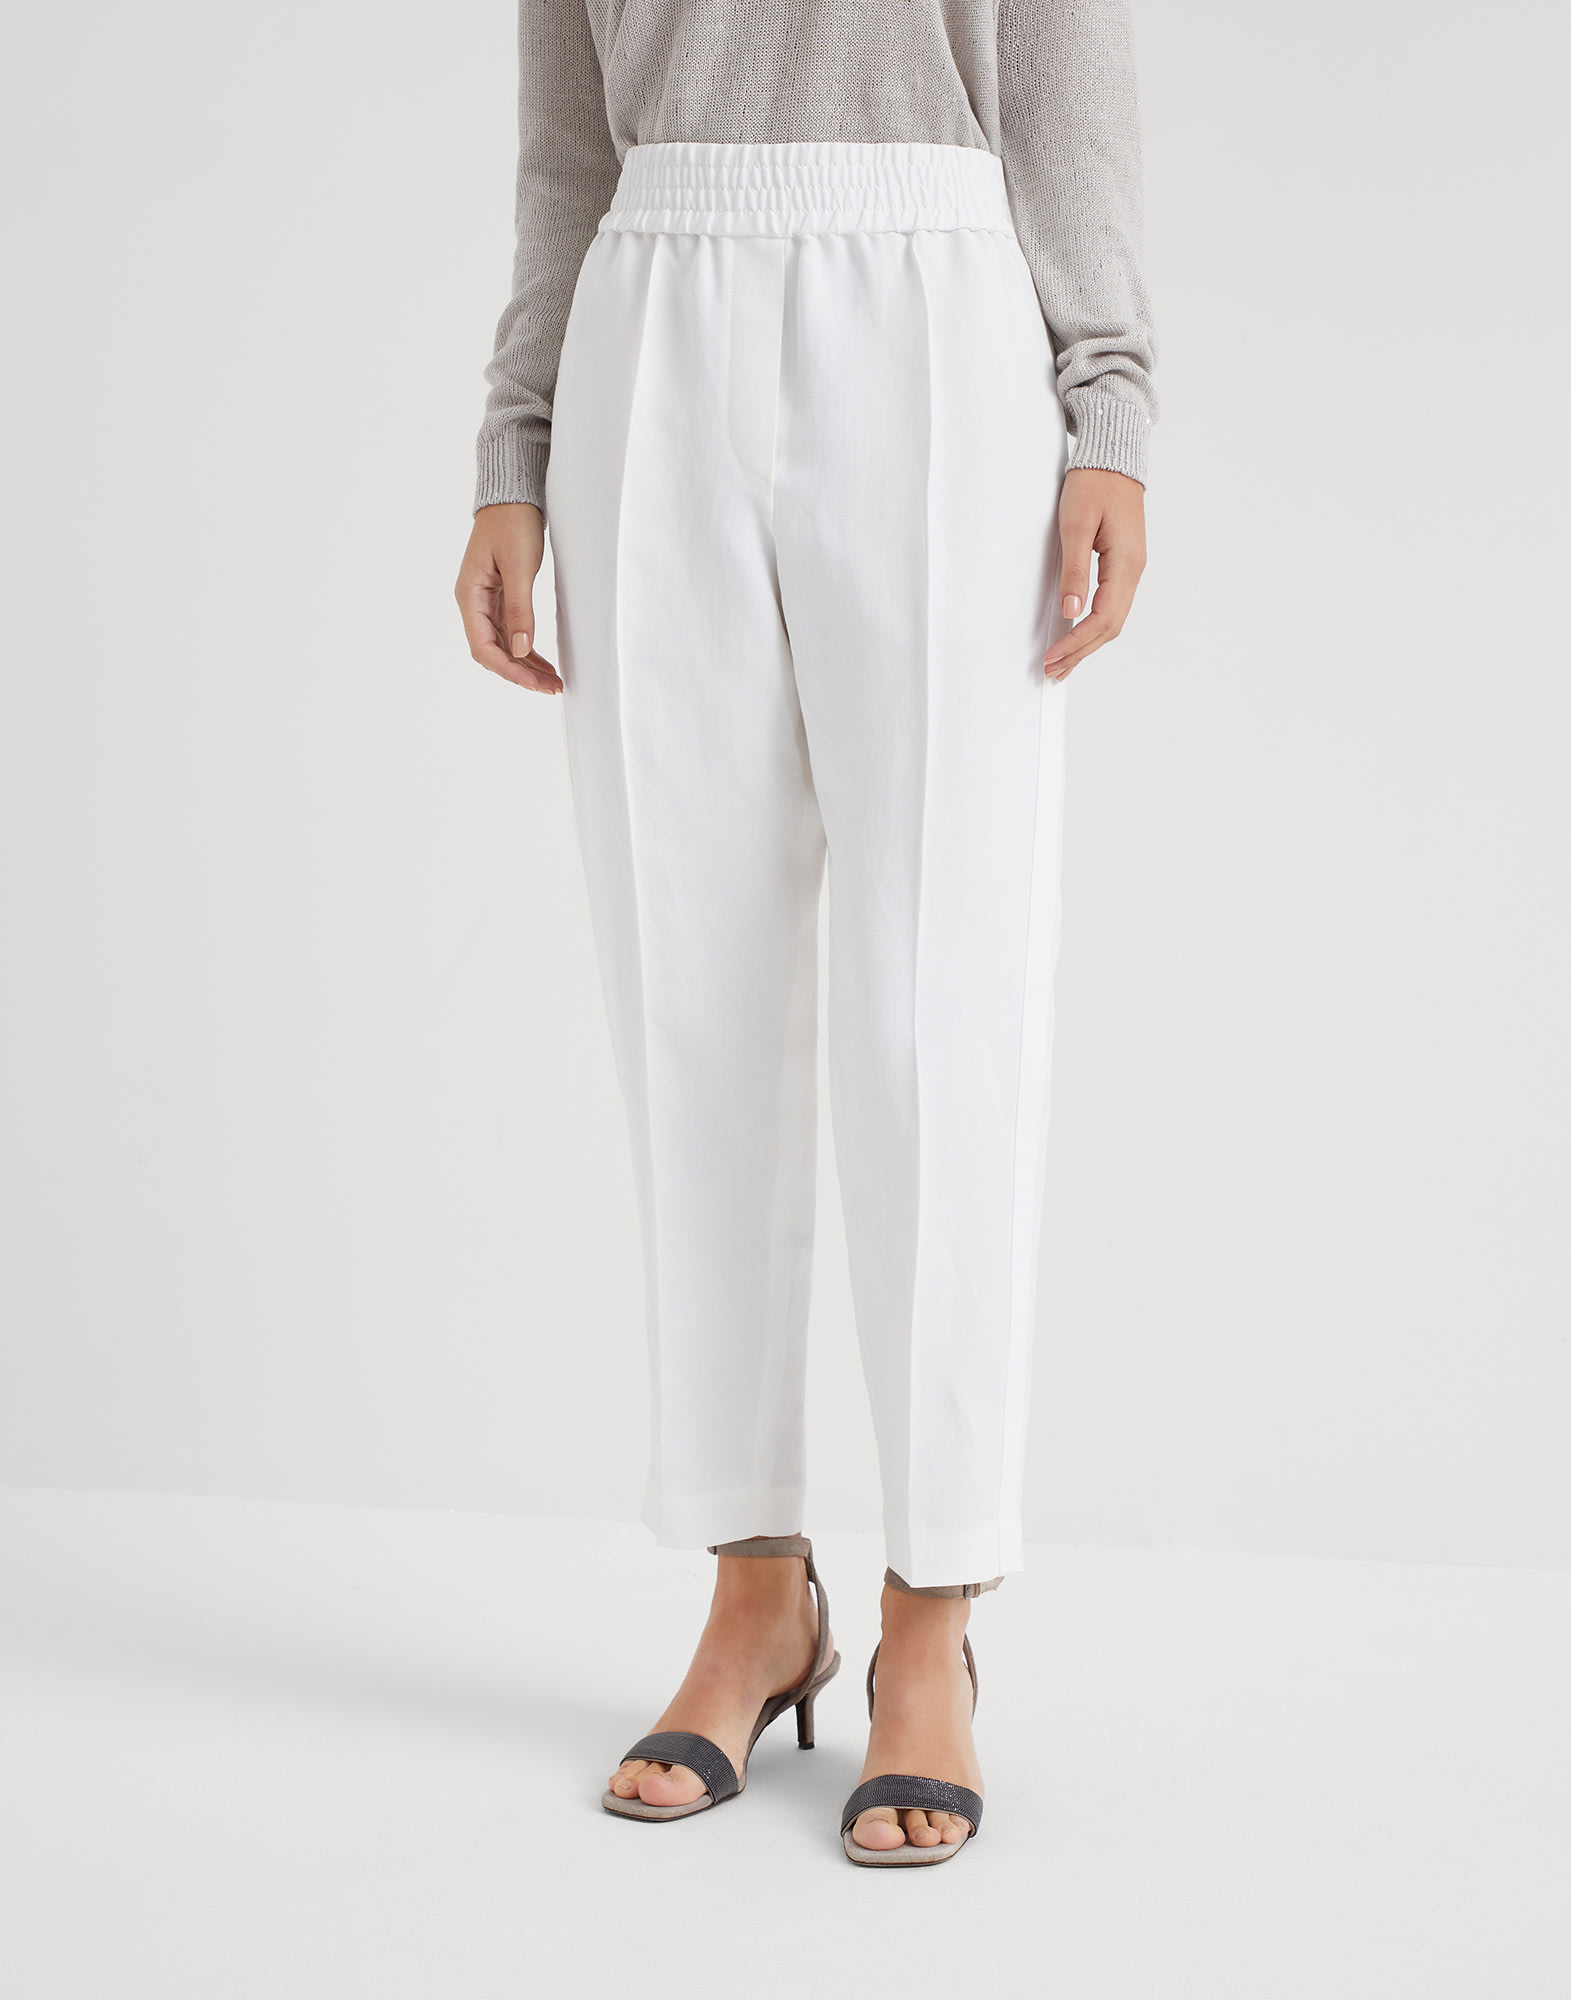 BRIXTON Sterling Womens Pull On Pants - WHITE COMBO | Tillys | Pull on  pants, Women, Brixton